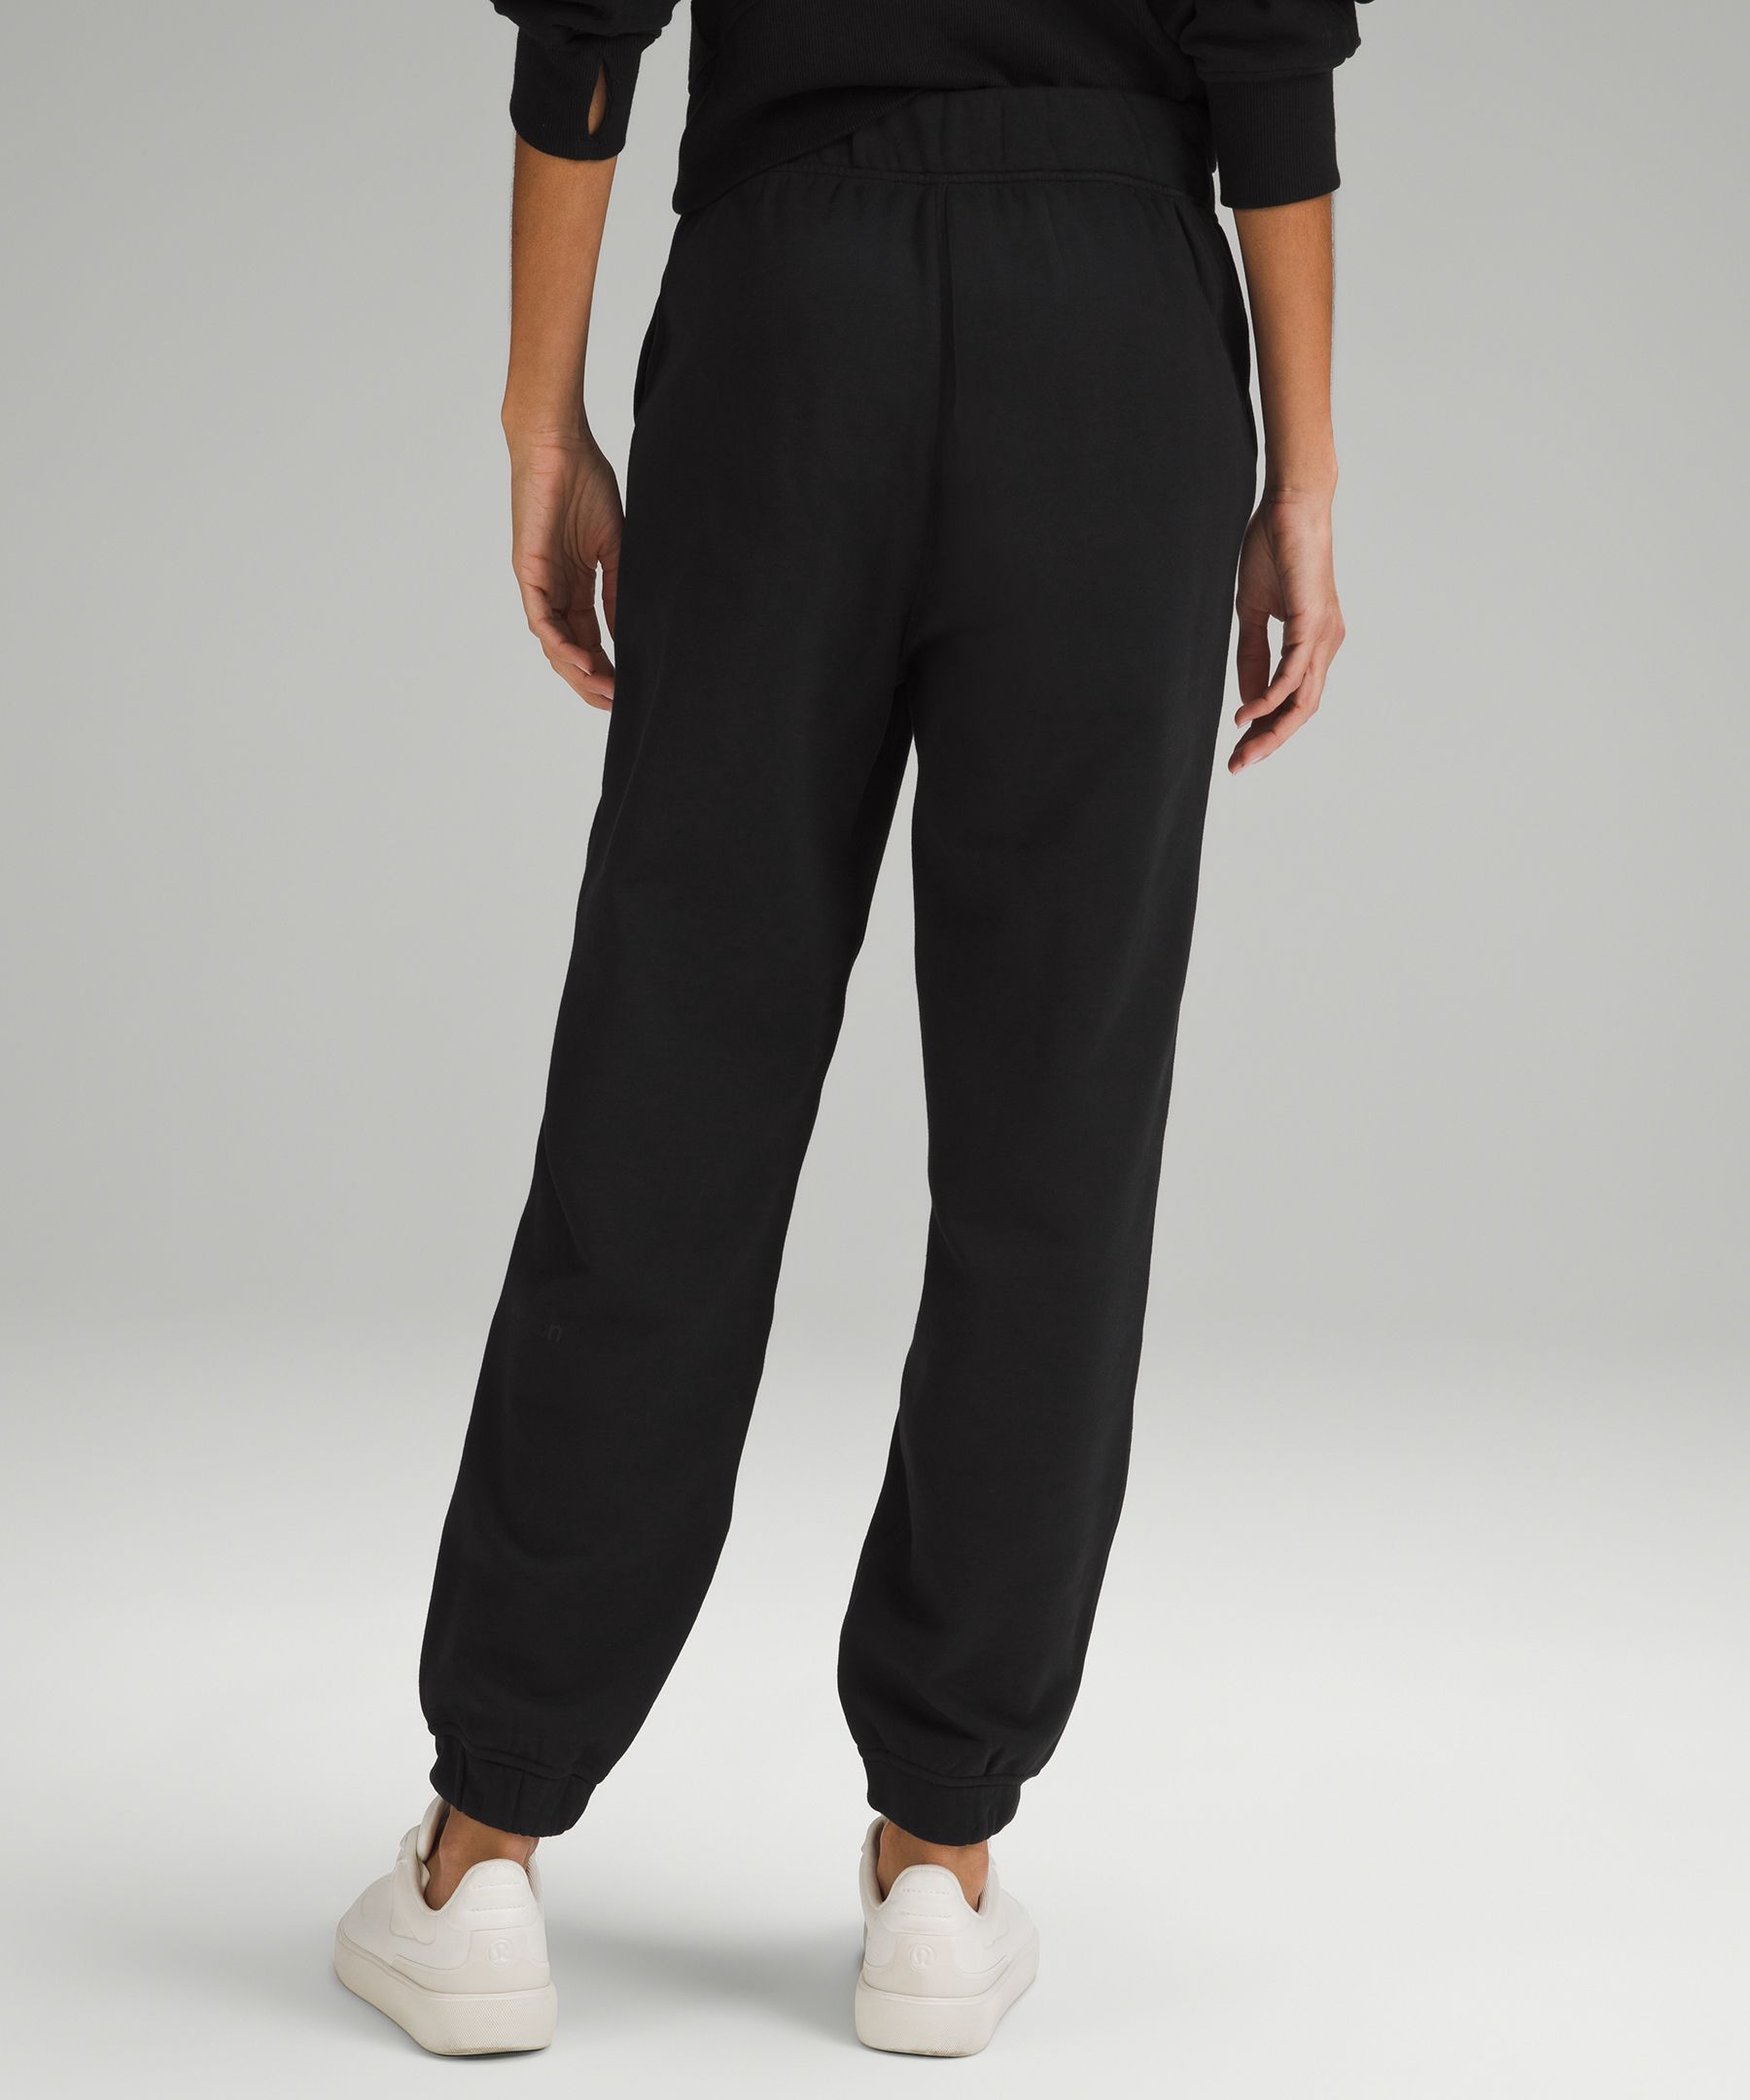 Buy New North Relaxed Fit Jogger Pants for Women Black-XS at